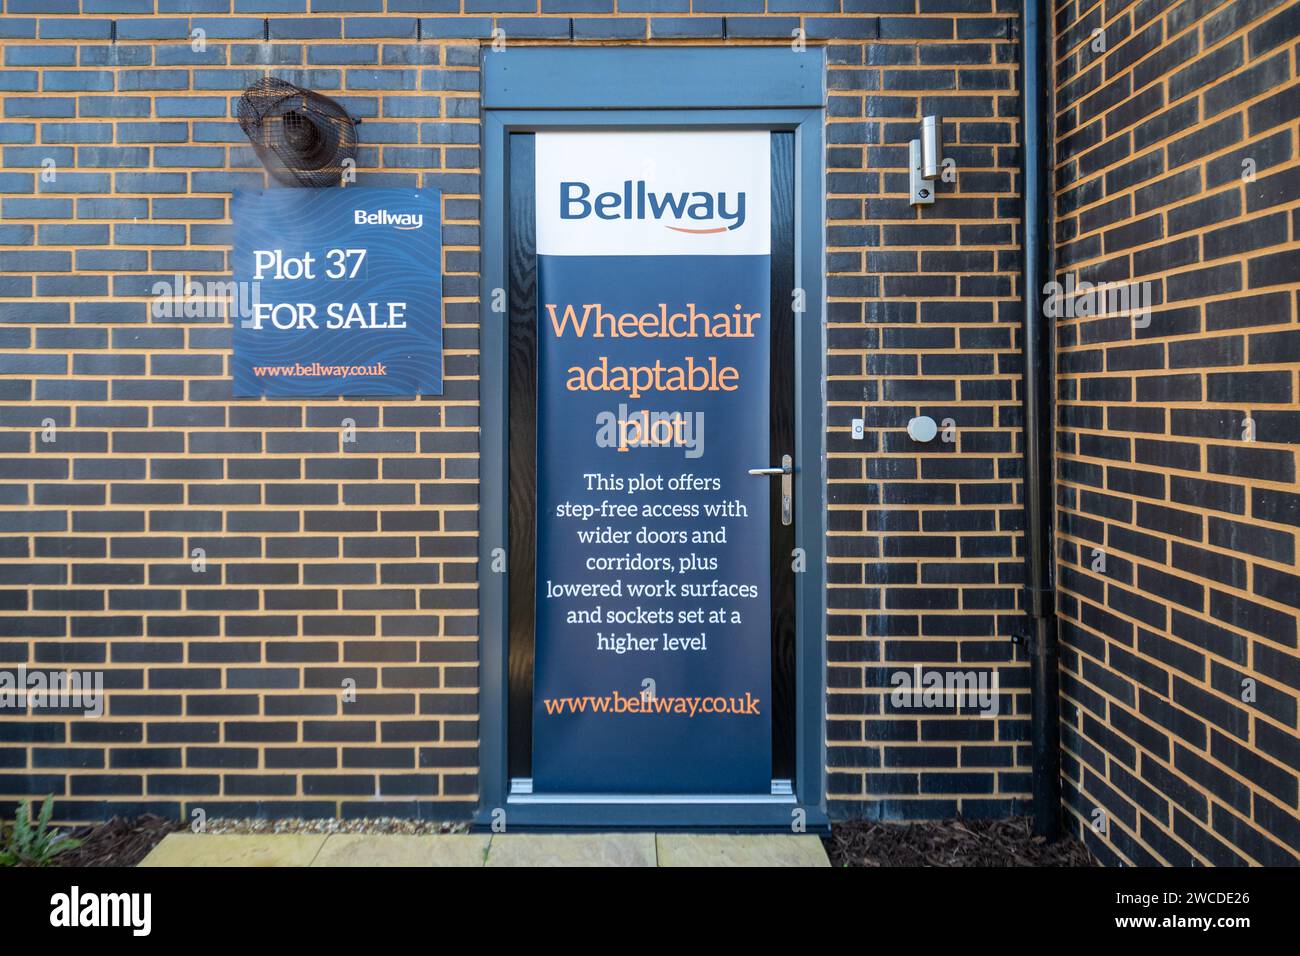 Wheelchair adaptable plot advertised by Bellway Homes developer on a ground floor flat or apartment in a new development, England, UK Stock Photo